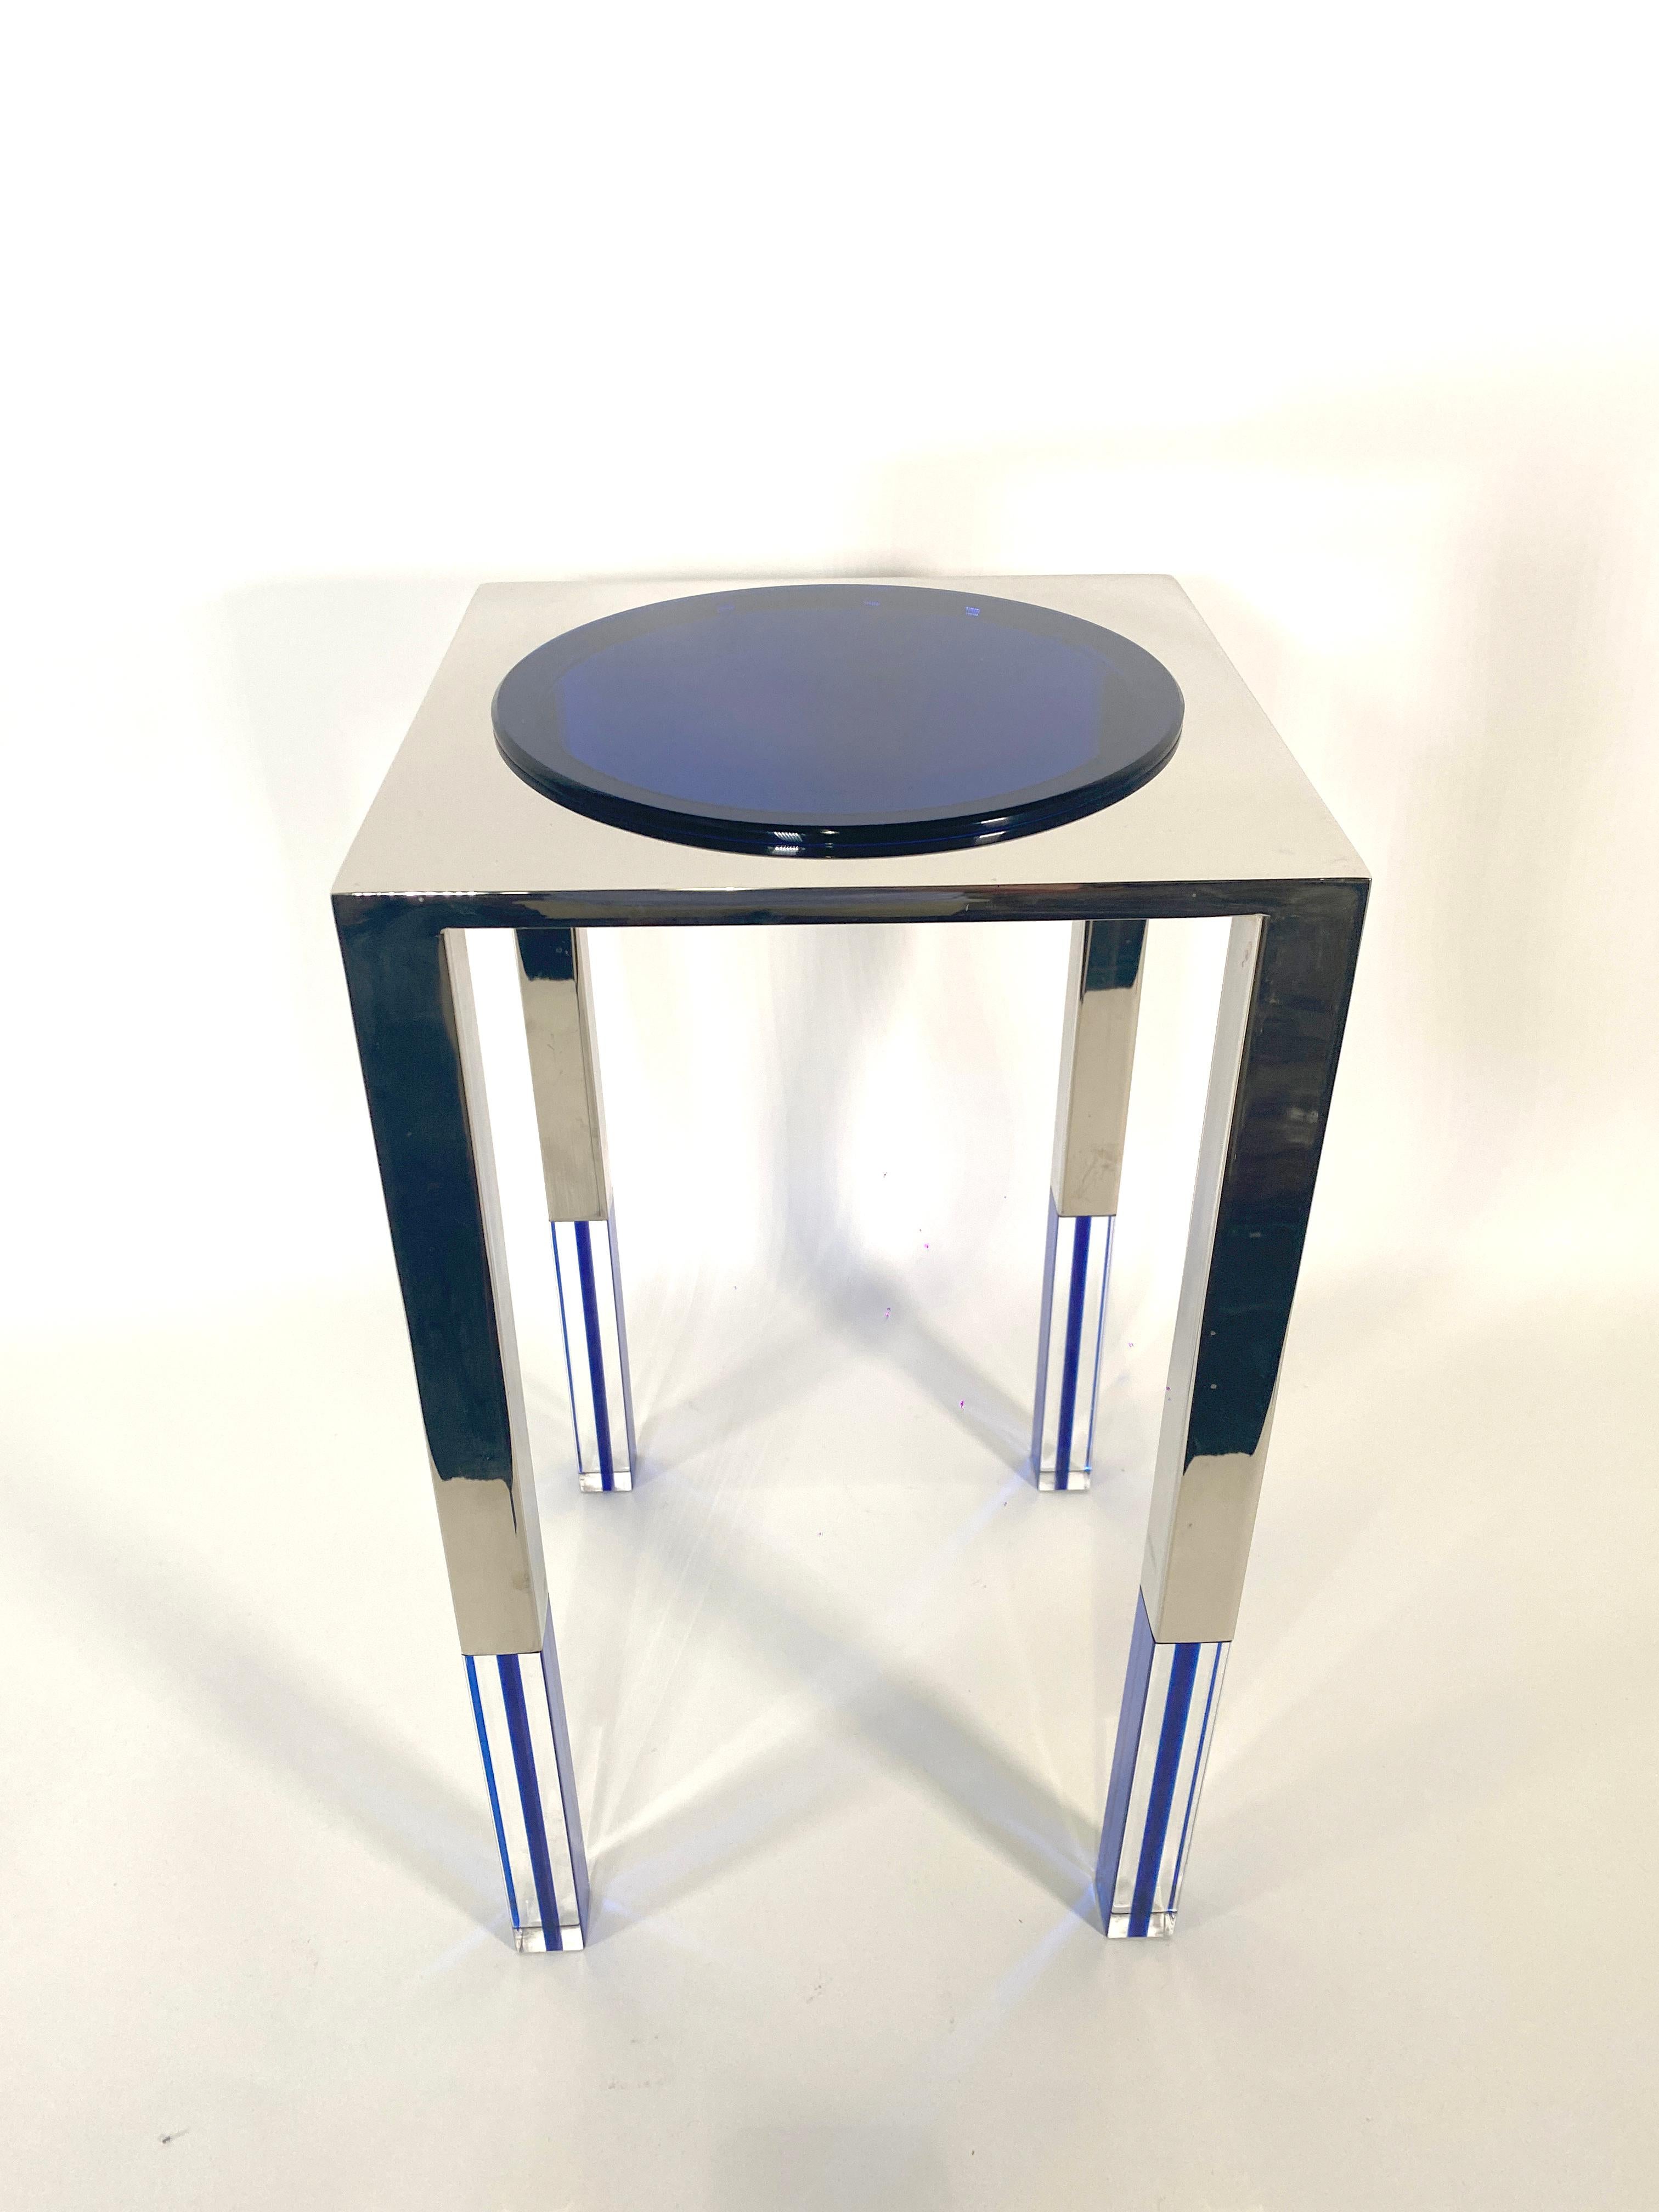 the blue lucite disc top surrounded by a polished nickel platform on square legs alternating in clear lucite, blue lucite and polished nickel. Production will be limited to 12 pieces of this total.We are the exclusive dealers for this table for